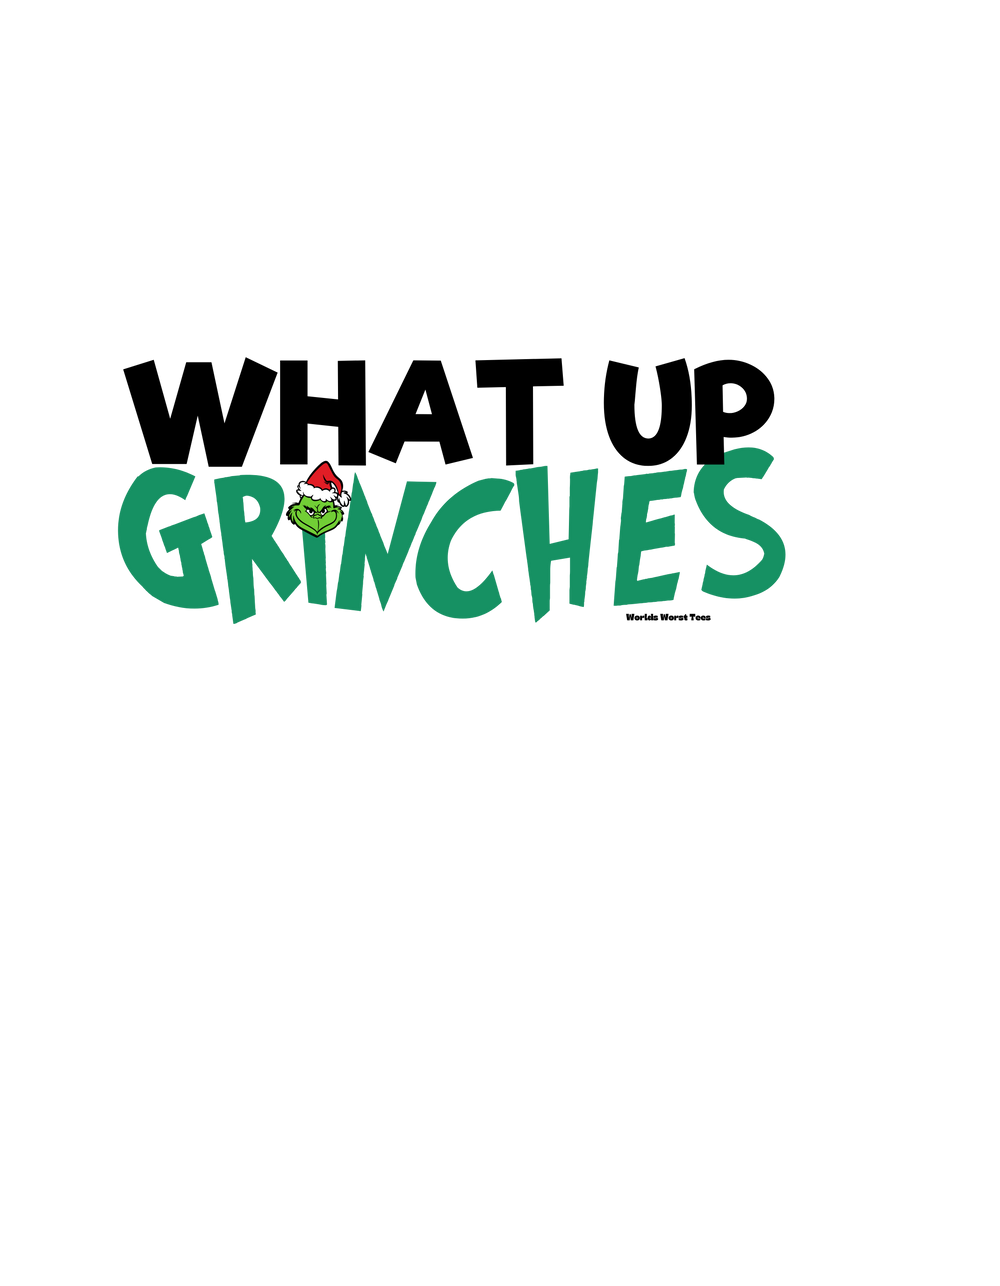 Unisex What up Grinches Tee featuring a green cartoon character on black background. Made of 80% ring-spun cotton, 20% polyester, with a relaxed fit and rolled-forward shoulder. From Worlds Worst Tees.